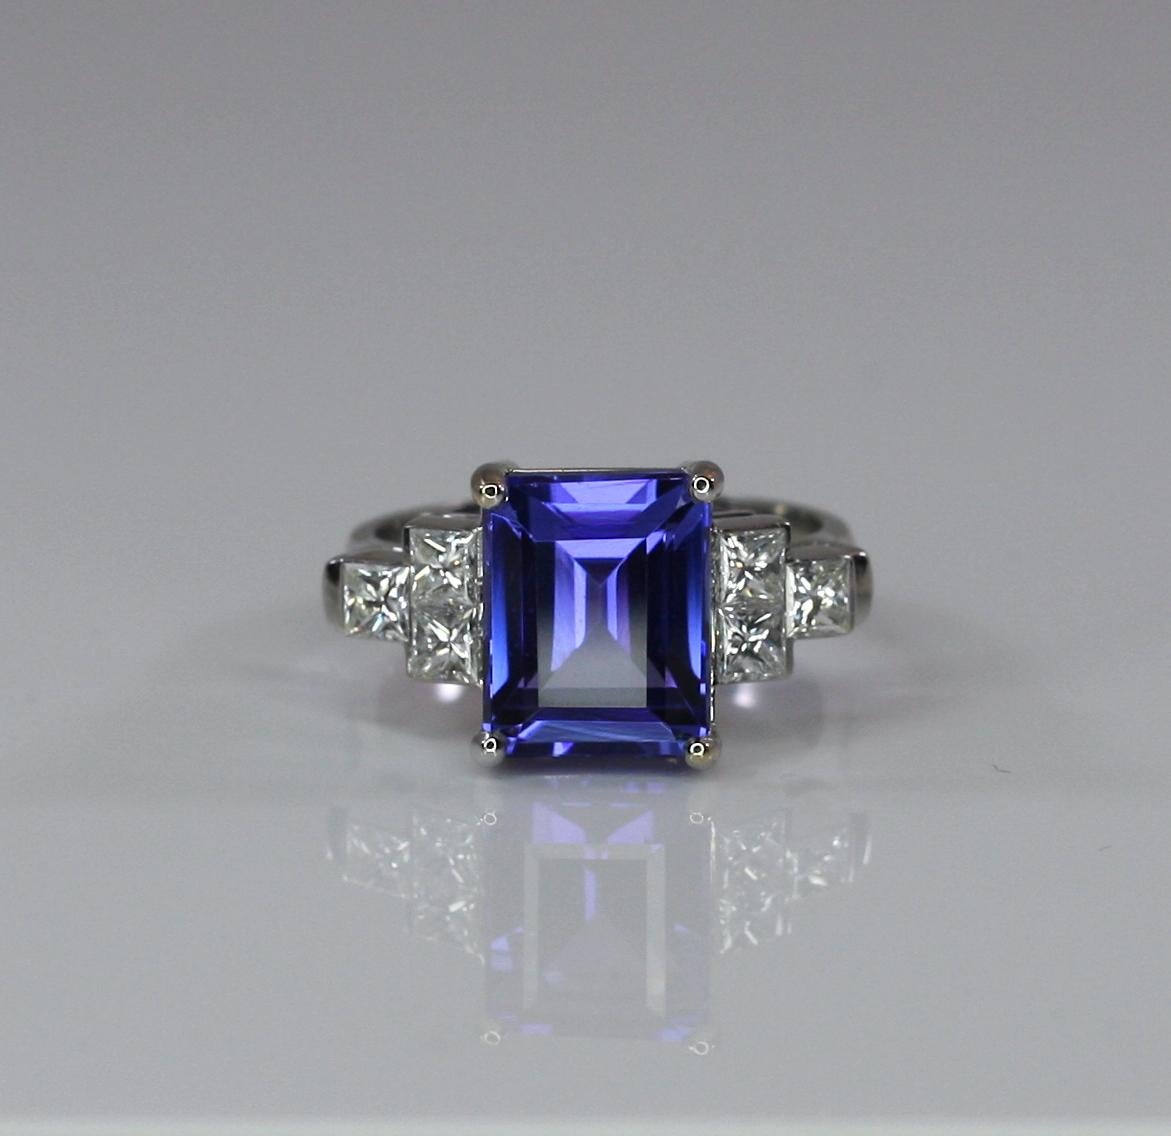 S.Georgios designer ring with an emerald-cut Tanzanite and princess cut Diamonds. This gorgeous ring is handmade from 18 Karat White gold in Athens Greece and features a 6.01 Carat Natural Tanzanite in precise cut, accompanied by 6 invisible set